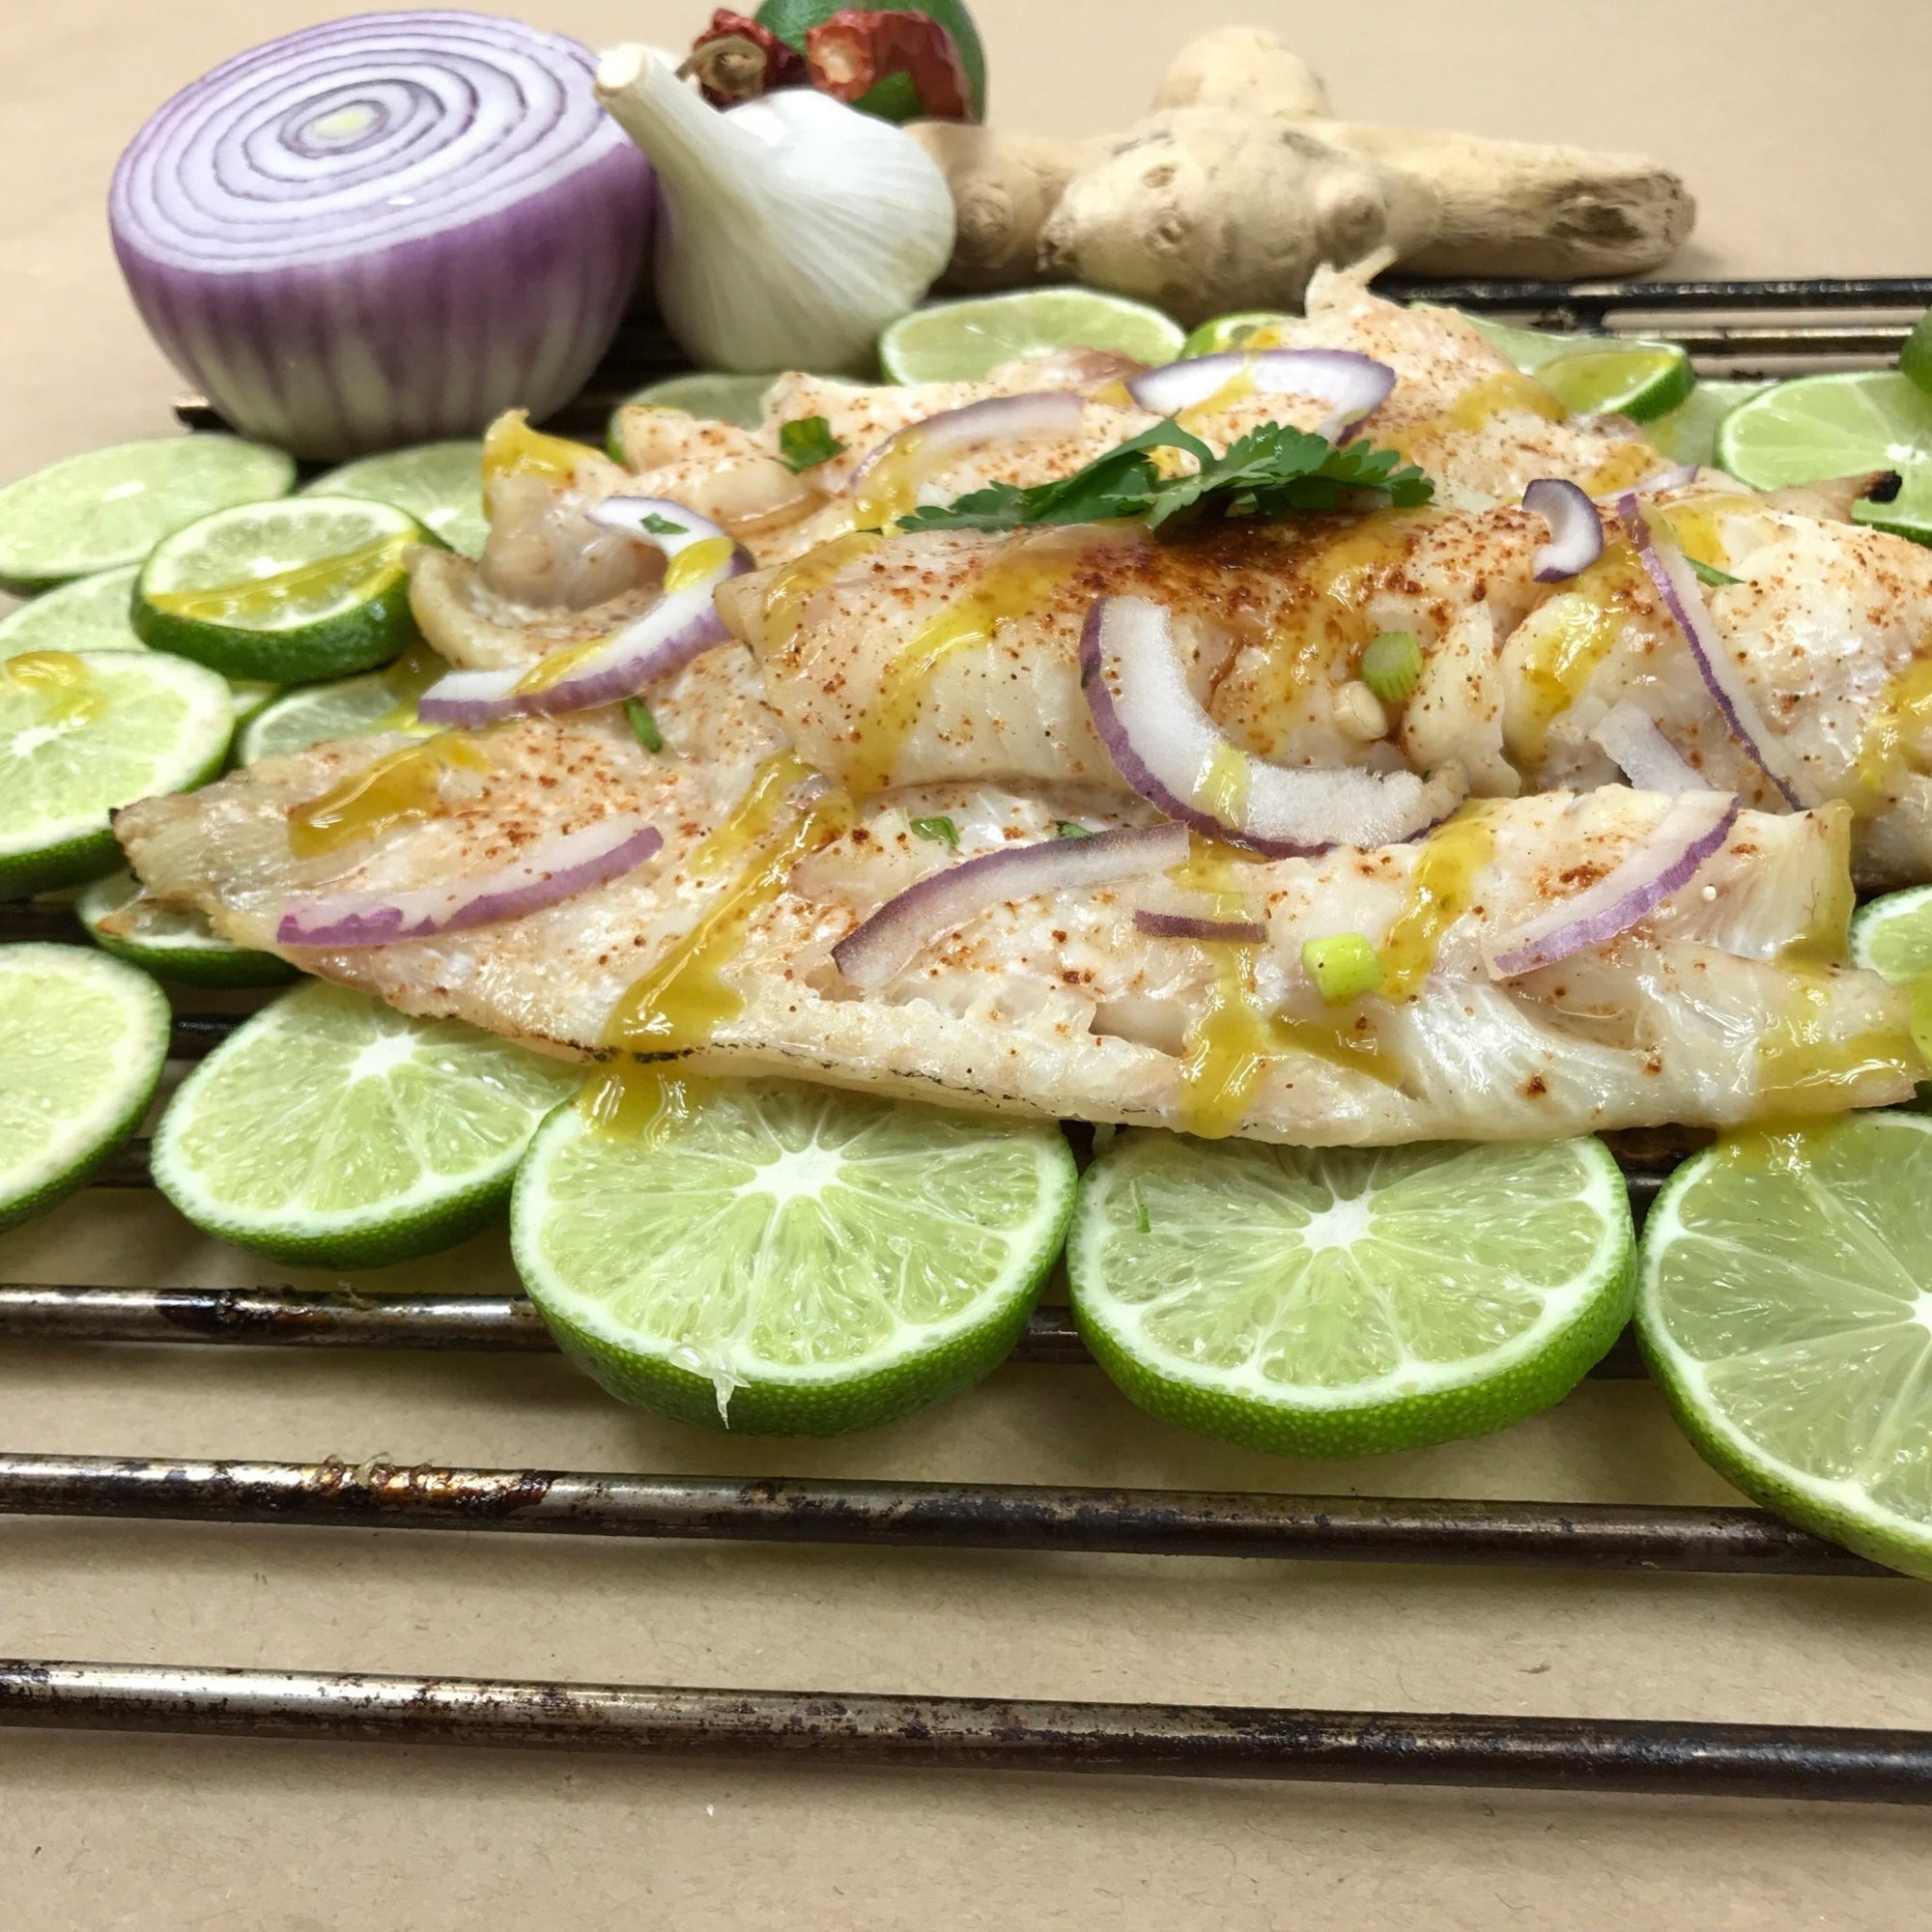 Haddock Grilled on a Bed of Limes - Maritime Madness